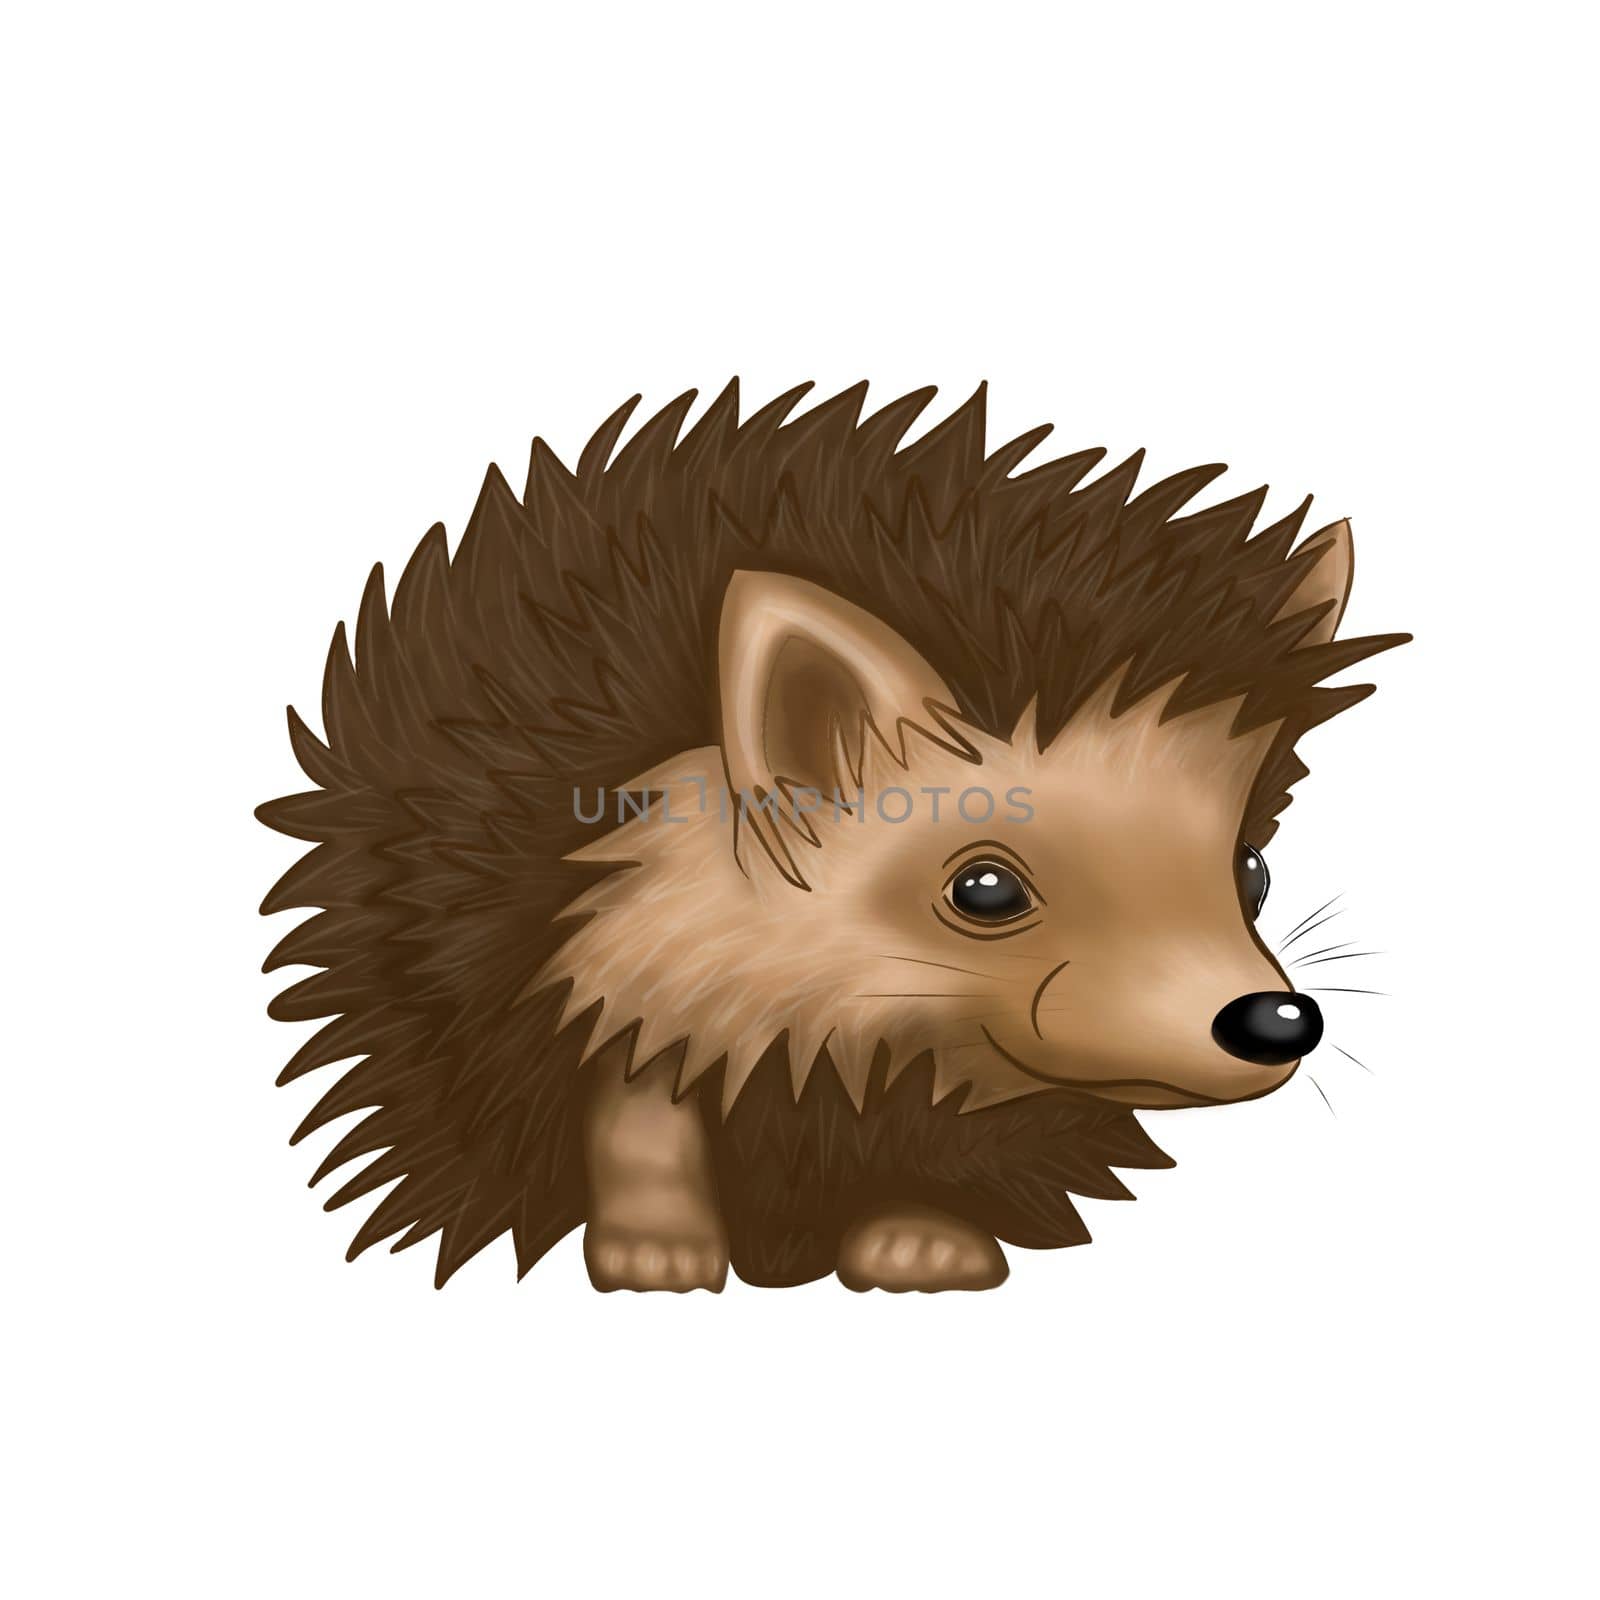 Illustration of a hedgehog on an isolated background. Clip art animals by Alina_Lebed